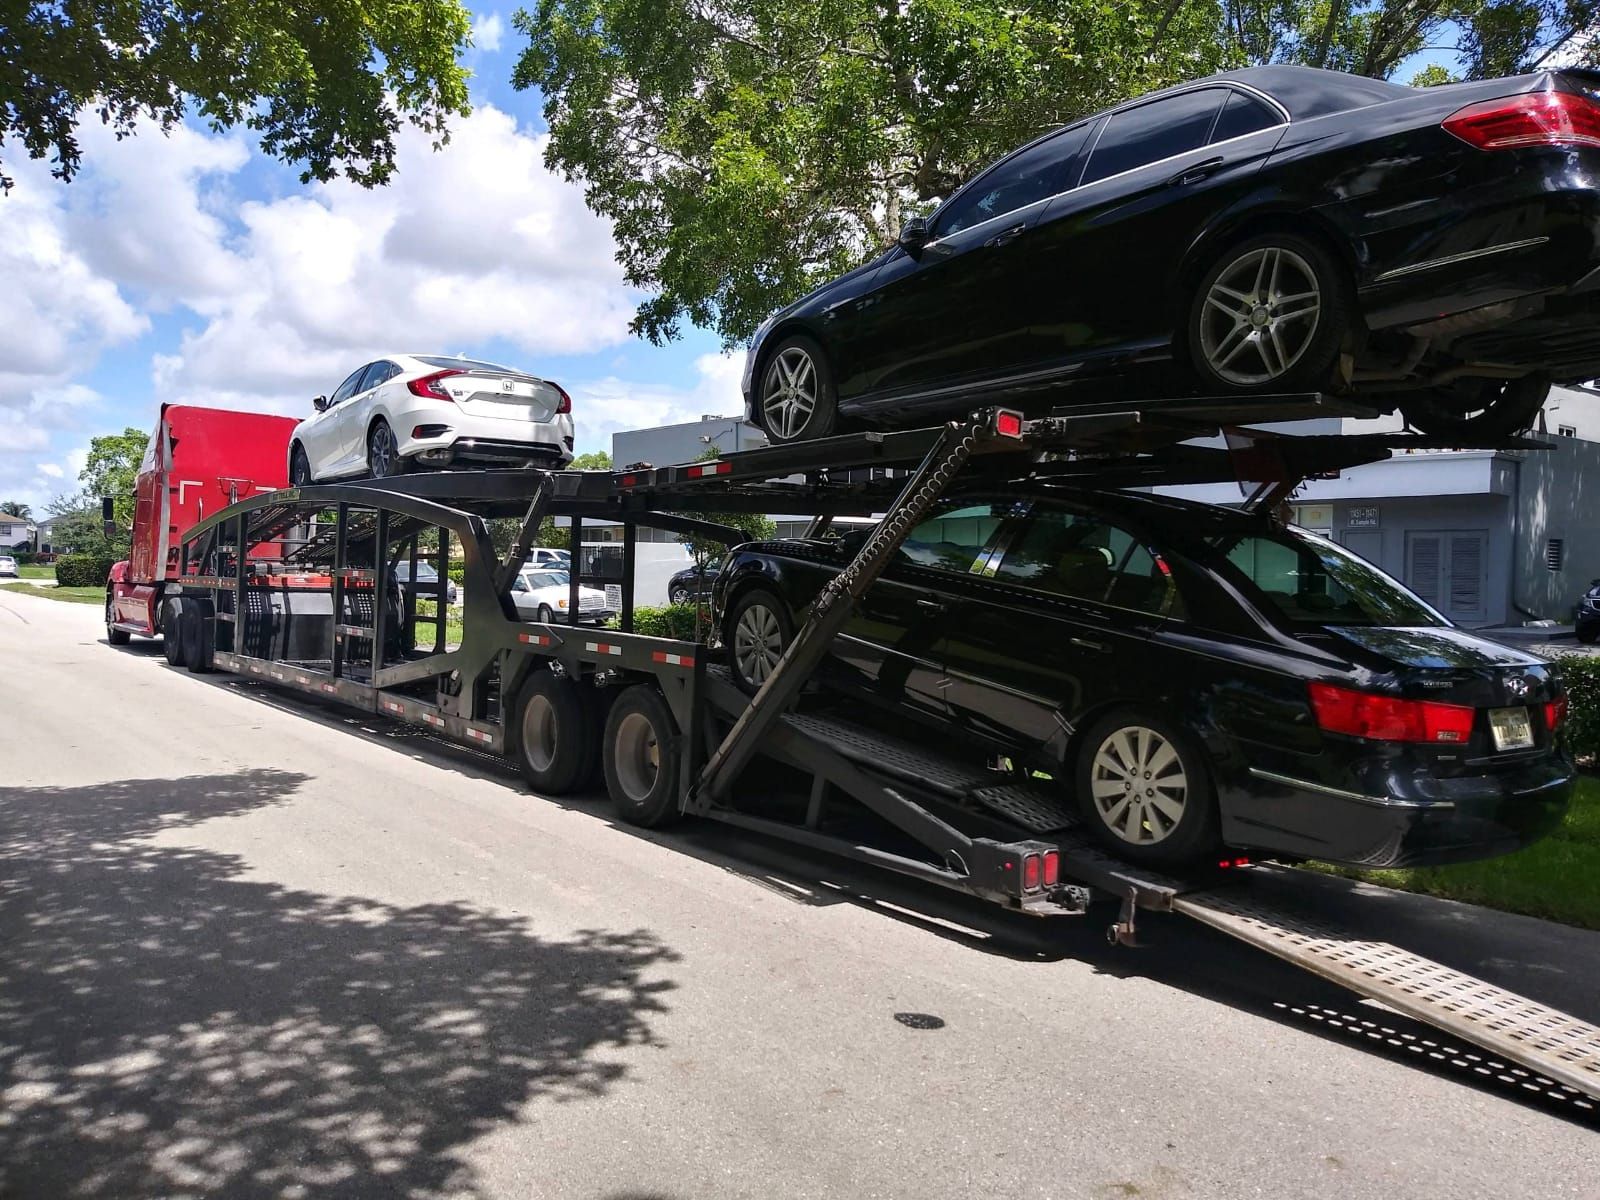 The Auto Transport Timeline: What to Expect From Start to Finish